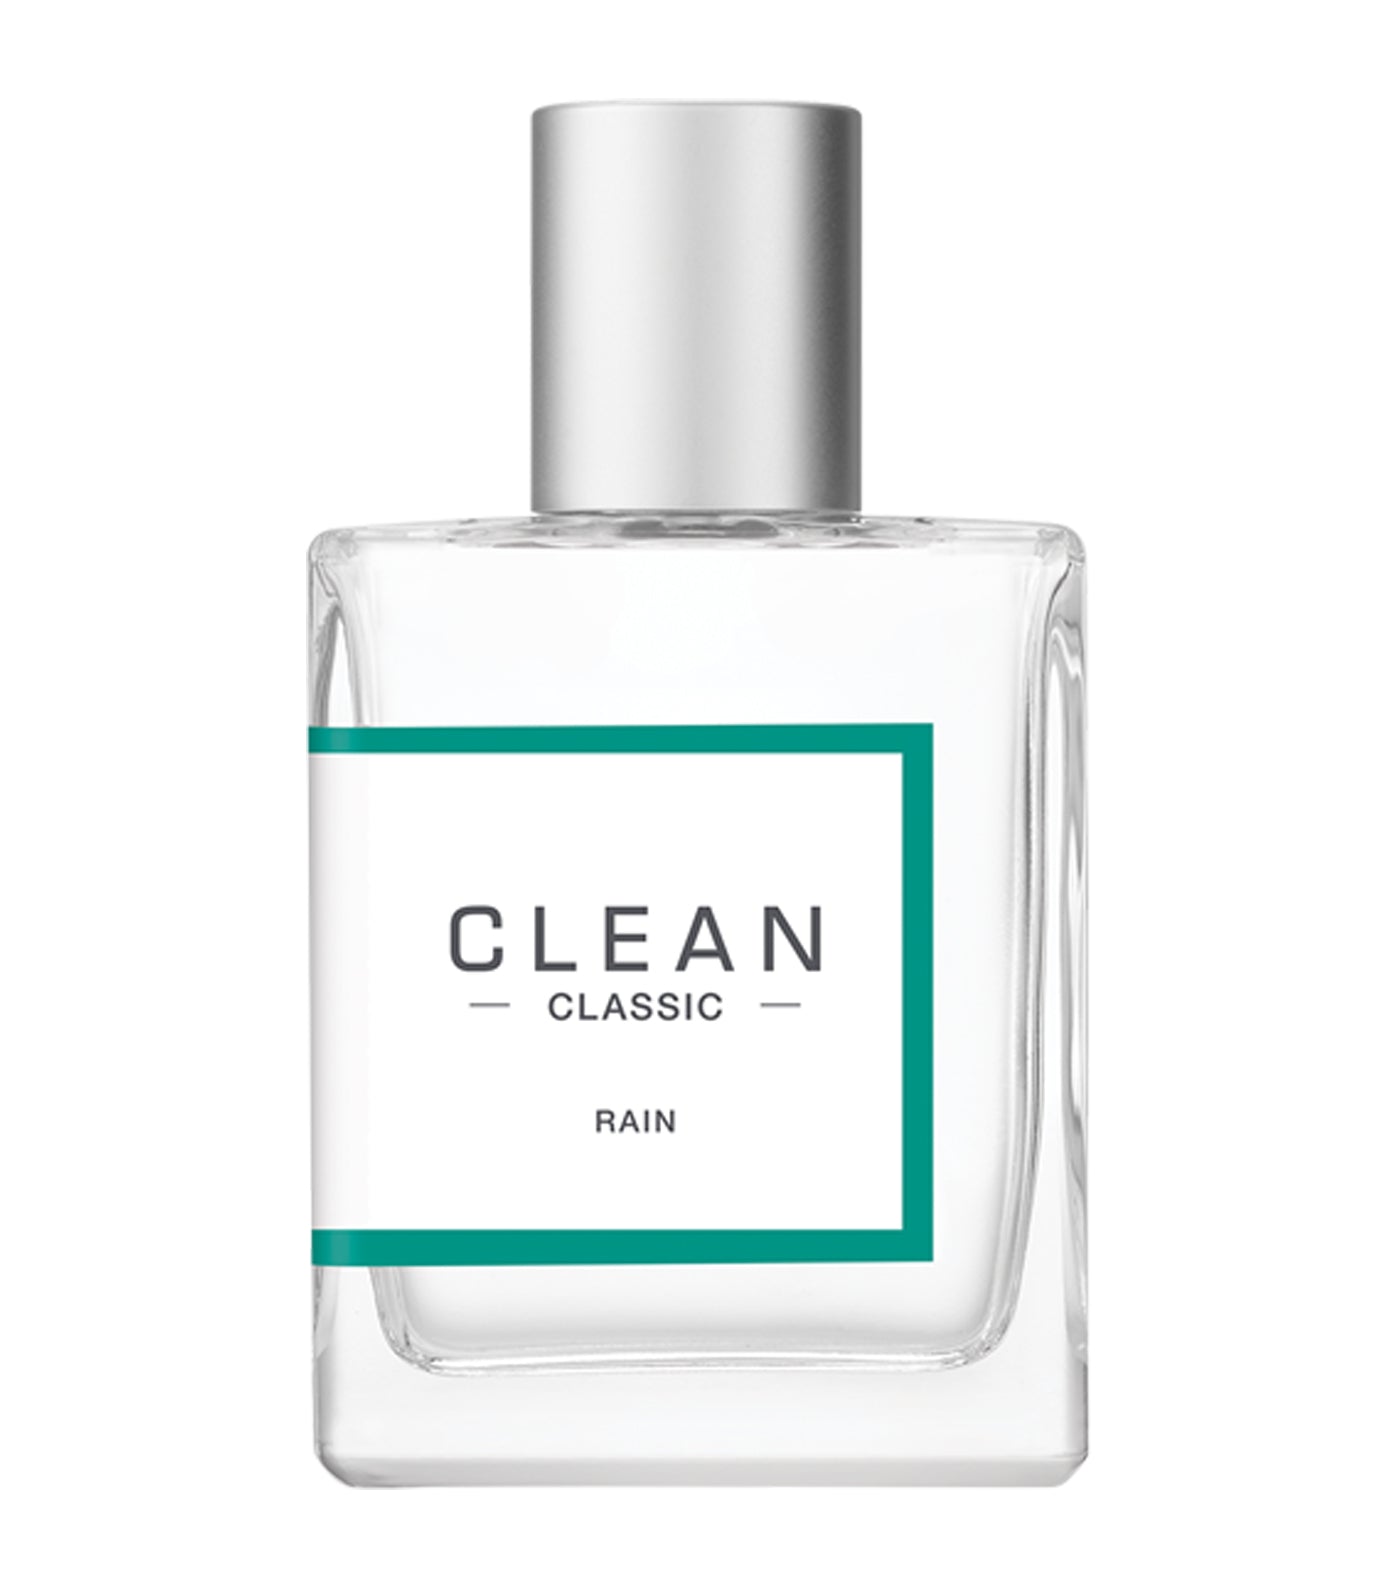 CLEAN CLASSIC Rain by CLEAN Beauty Collective